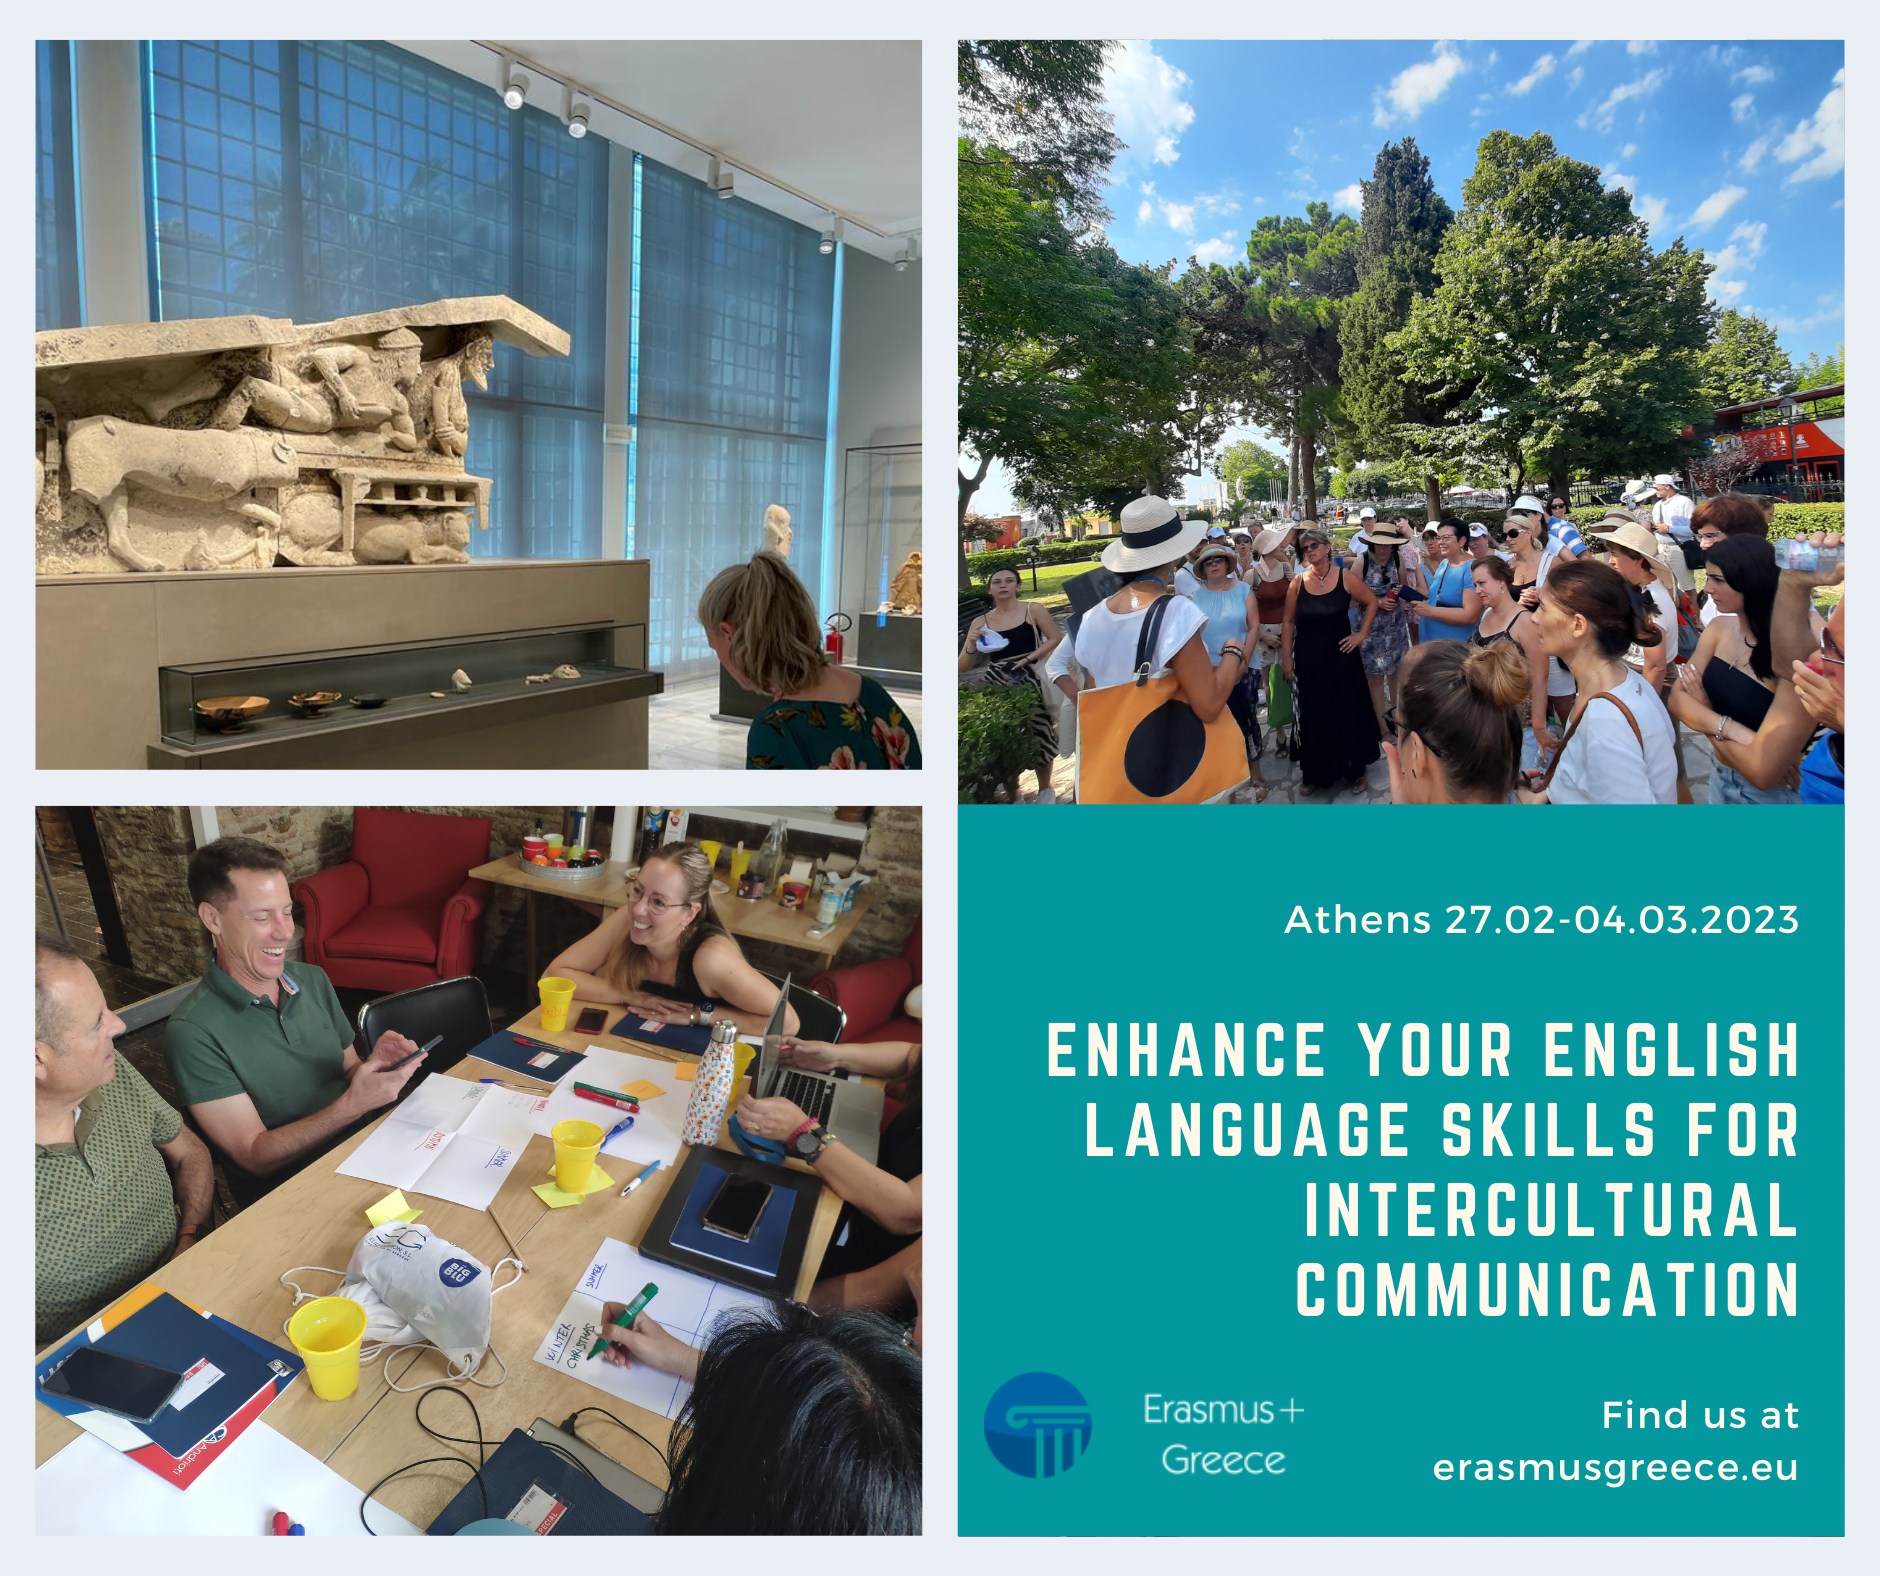 Looking to improve your English Skills? Next dates for our course Enhance you English Language Skills: 27th February to 4th March 2023 in Athens.